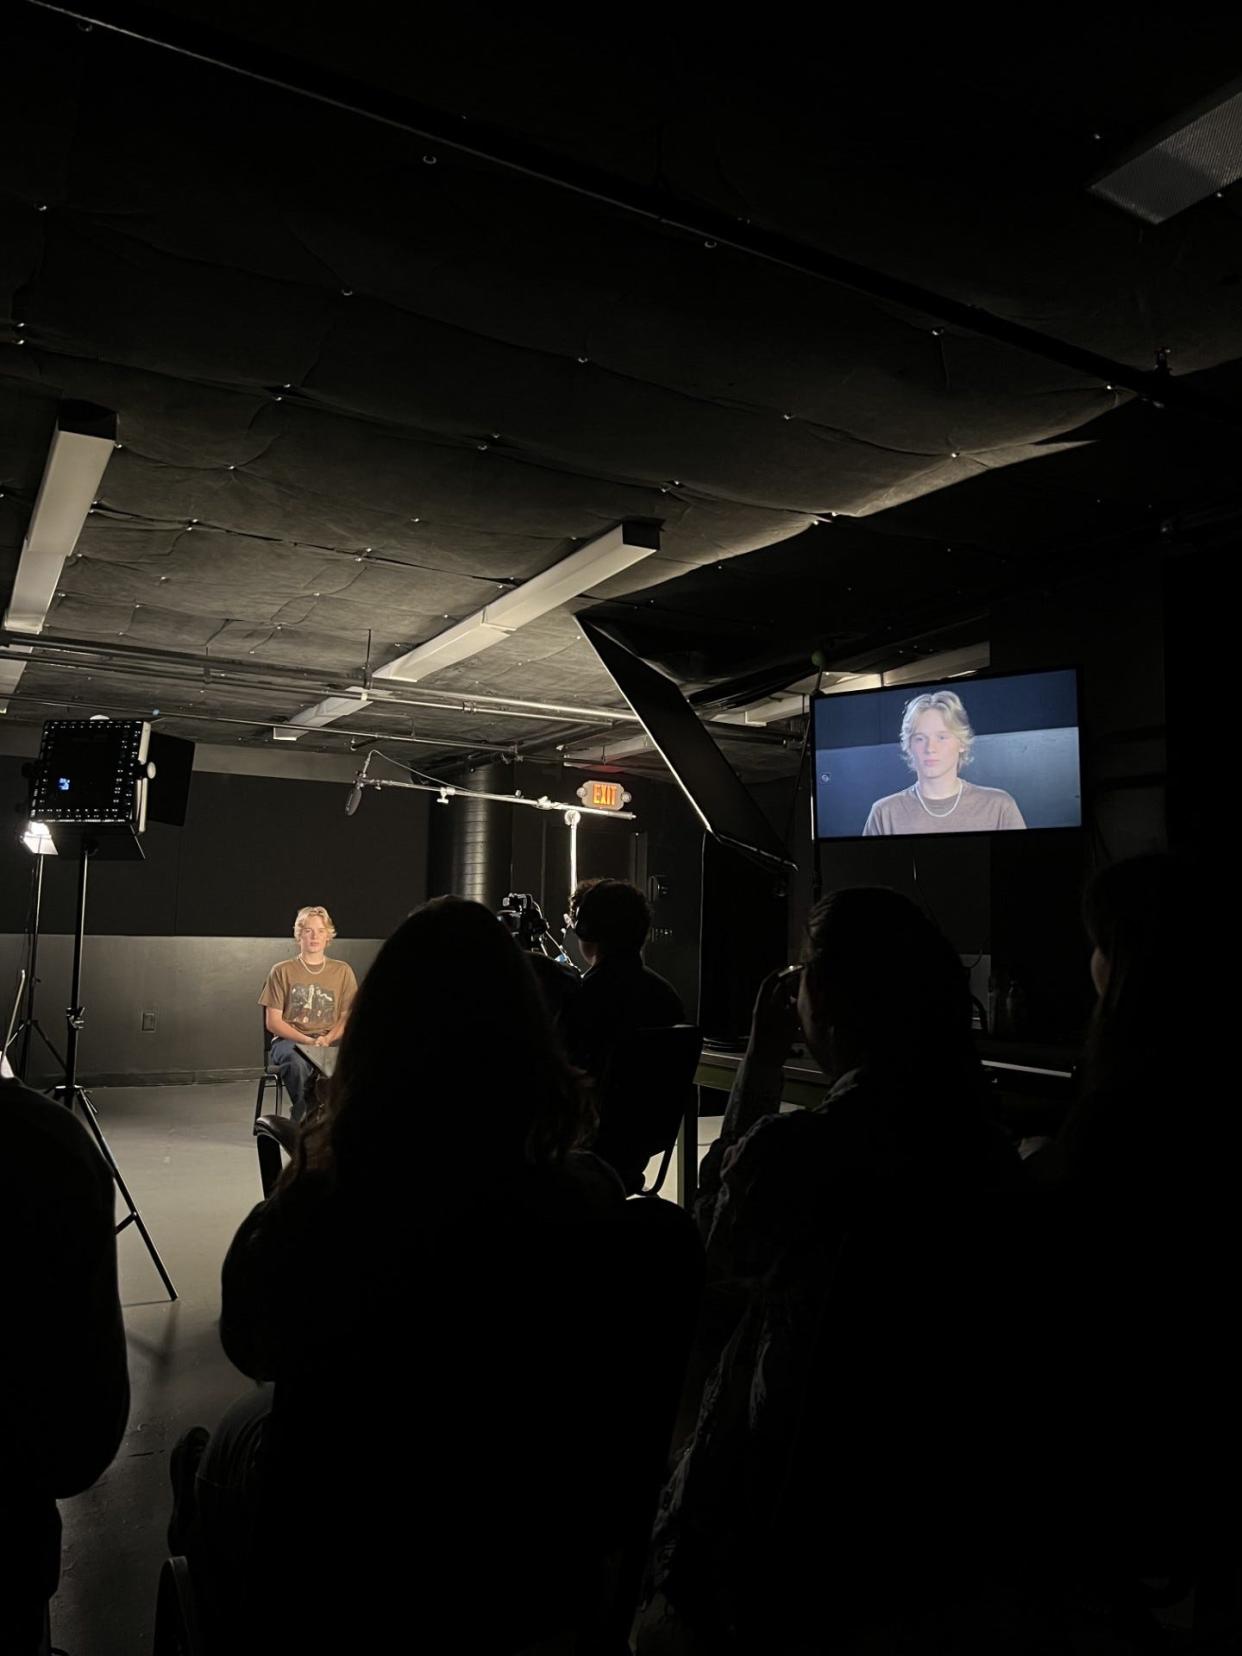 Jacob Smith was interviewed in front of a camera during the Summer Intensive Program offered by the American Academy of Dramatic Arts in Los Angeles.